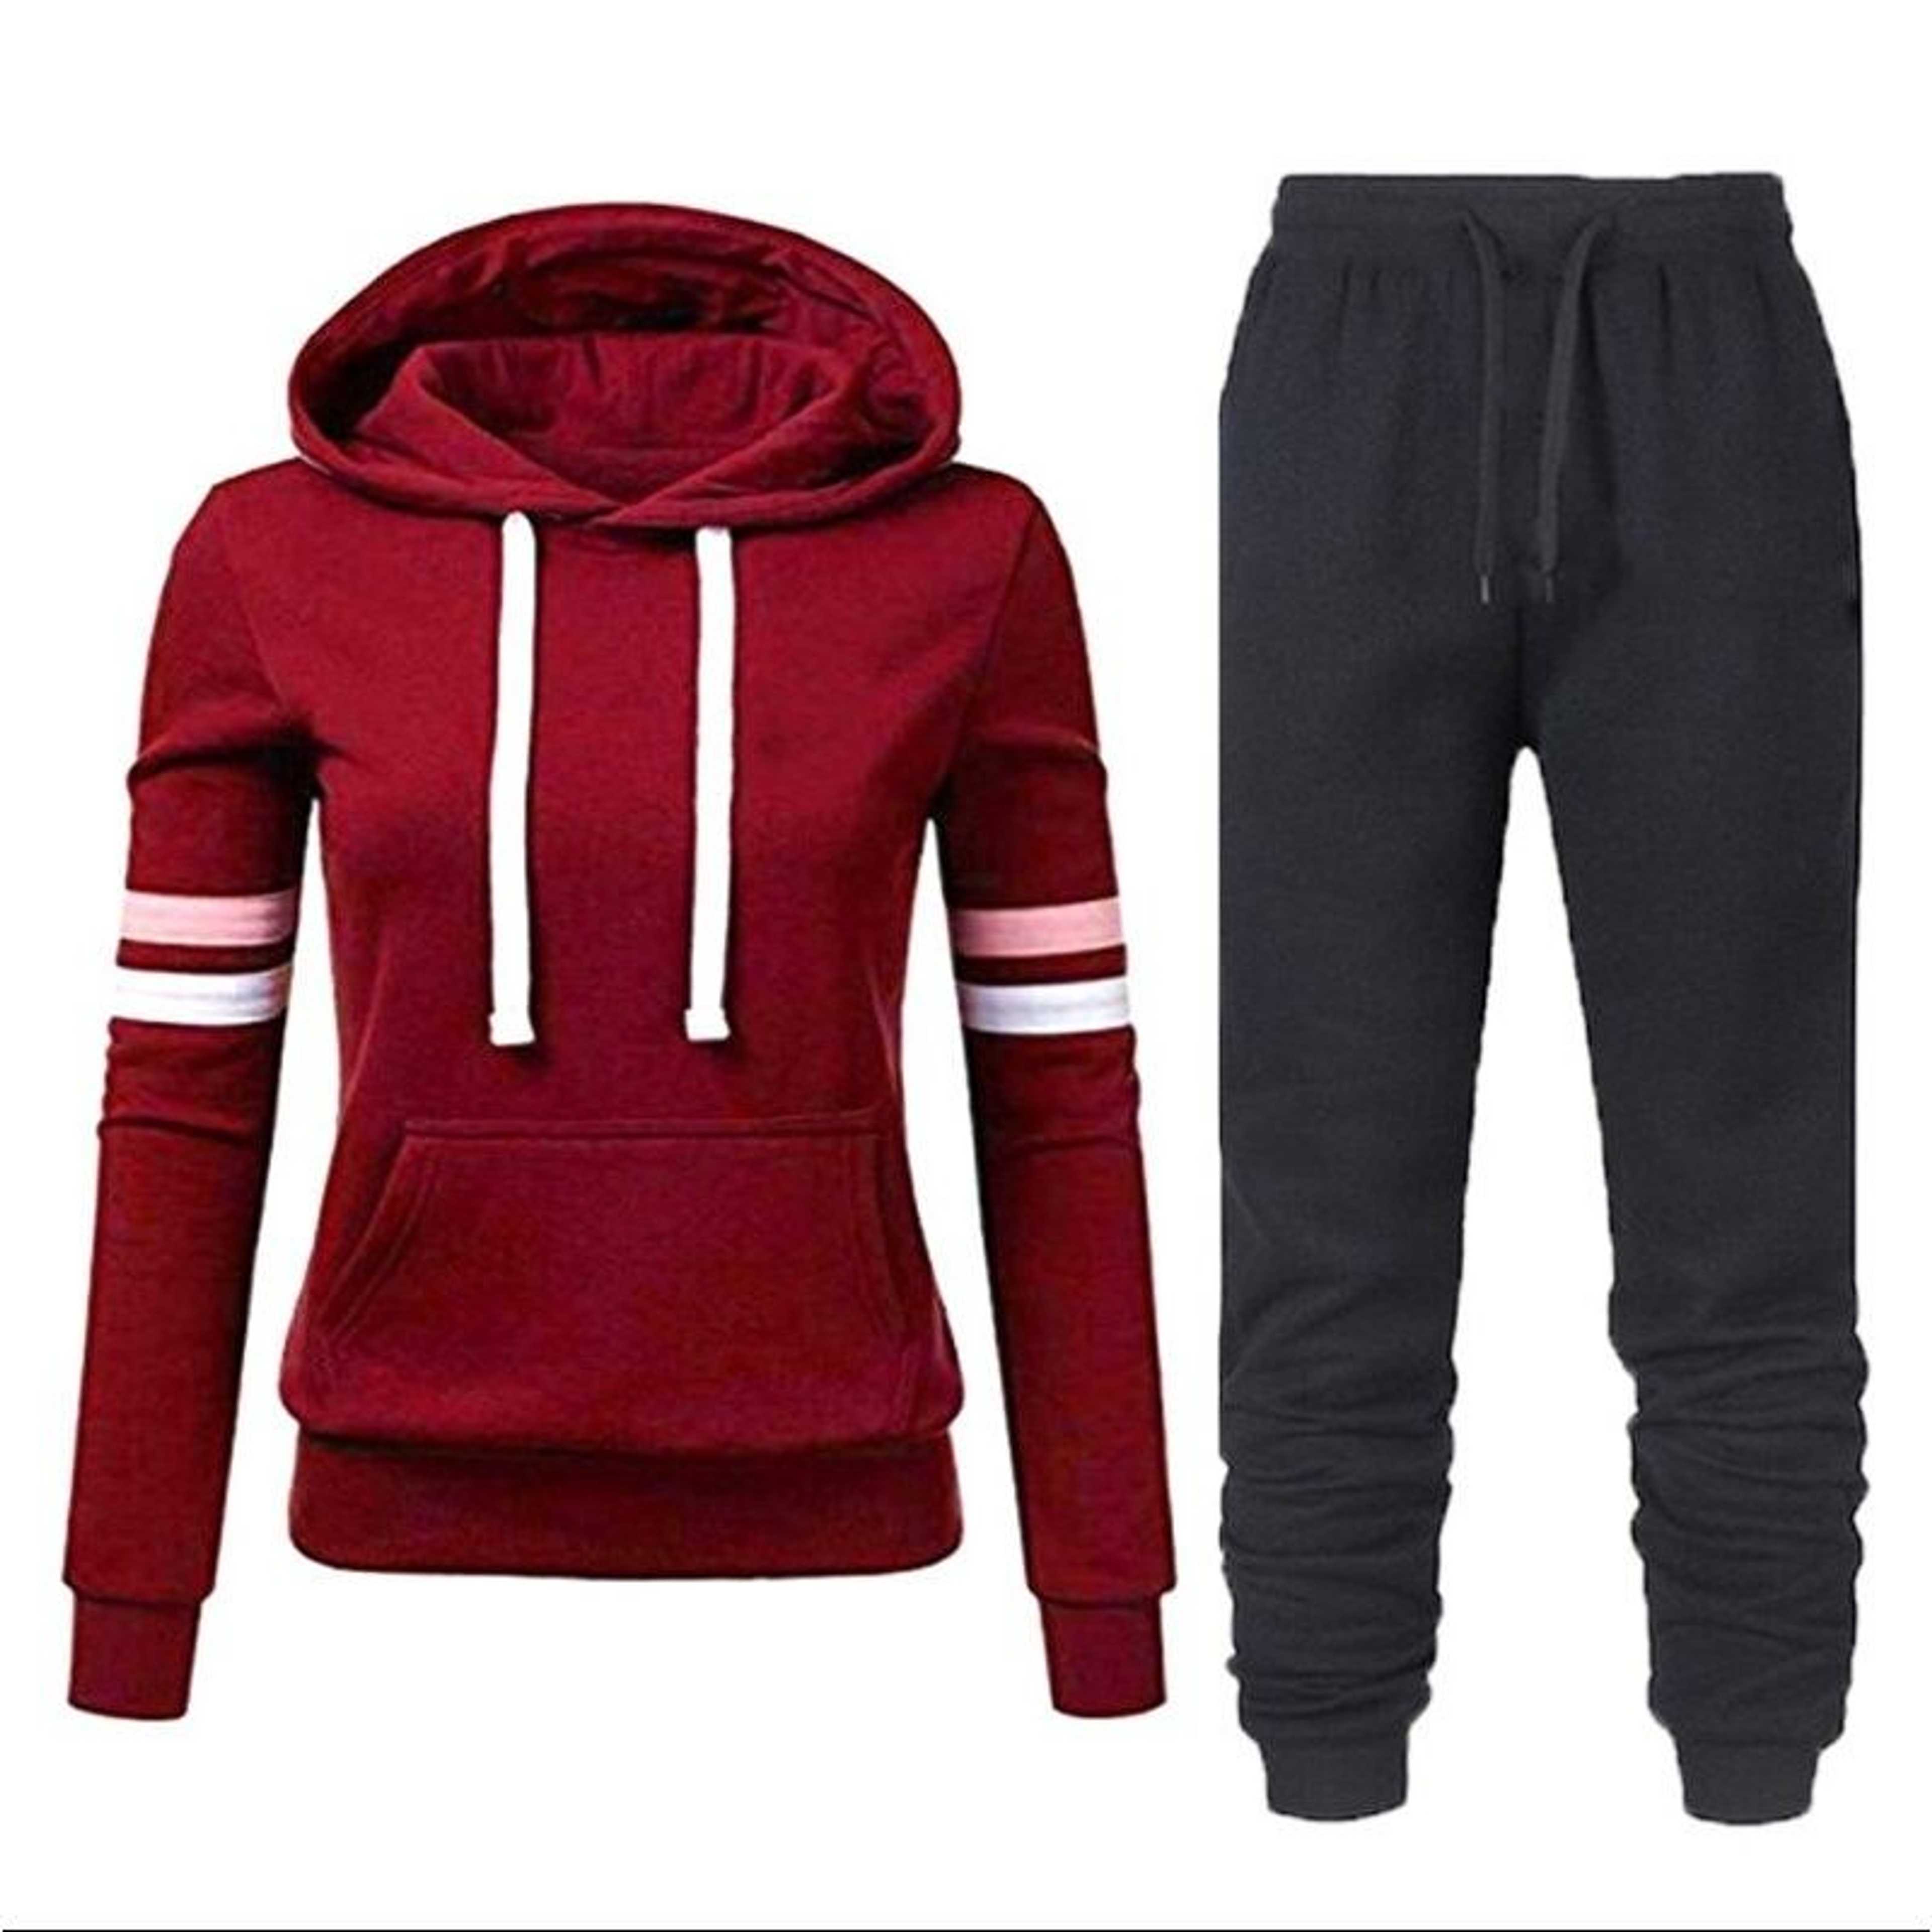 Track Suits For Womens In Red And Black